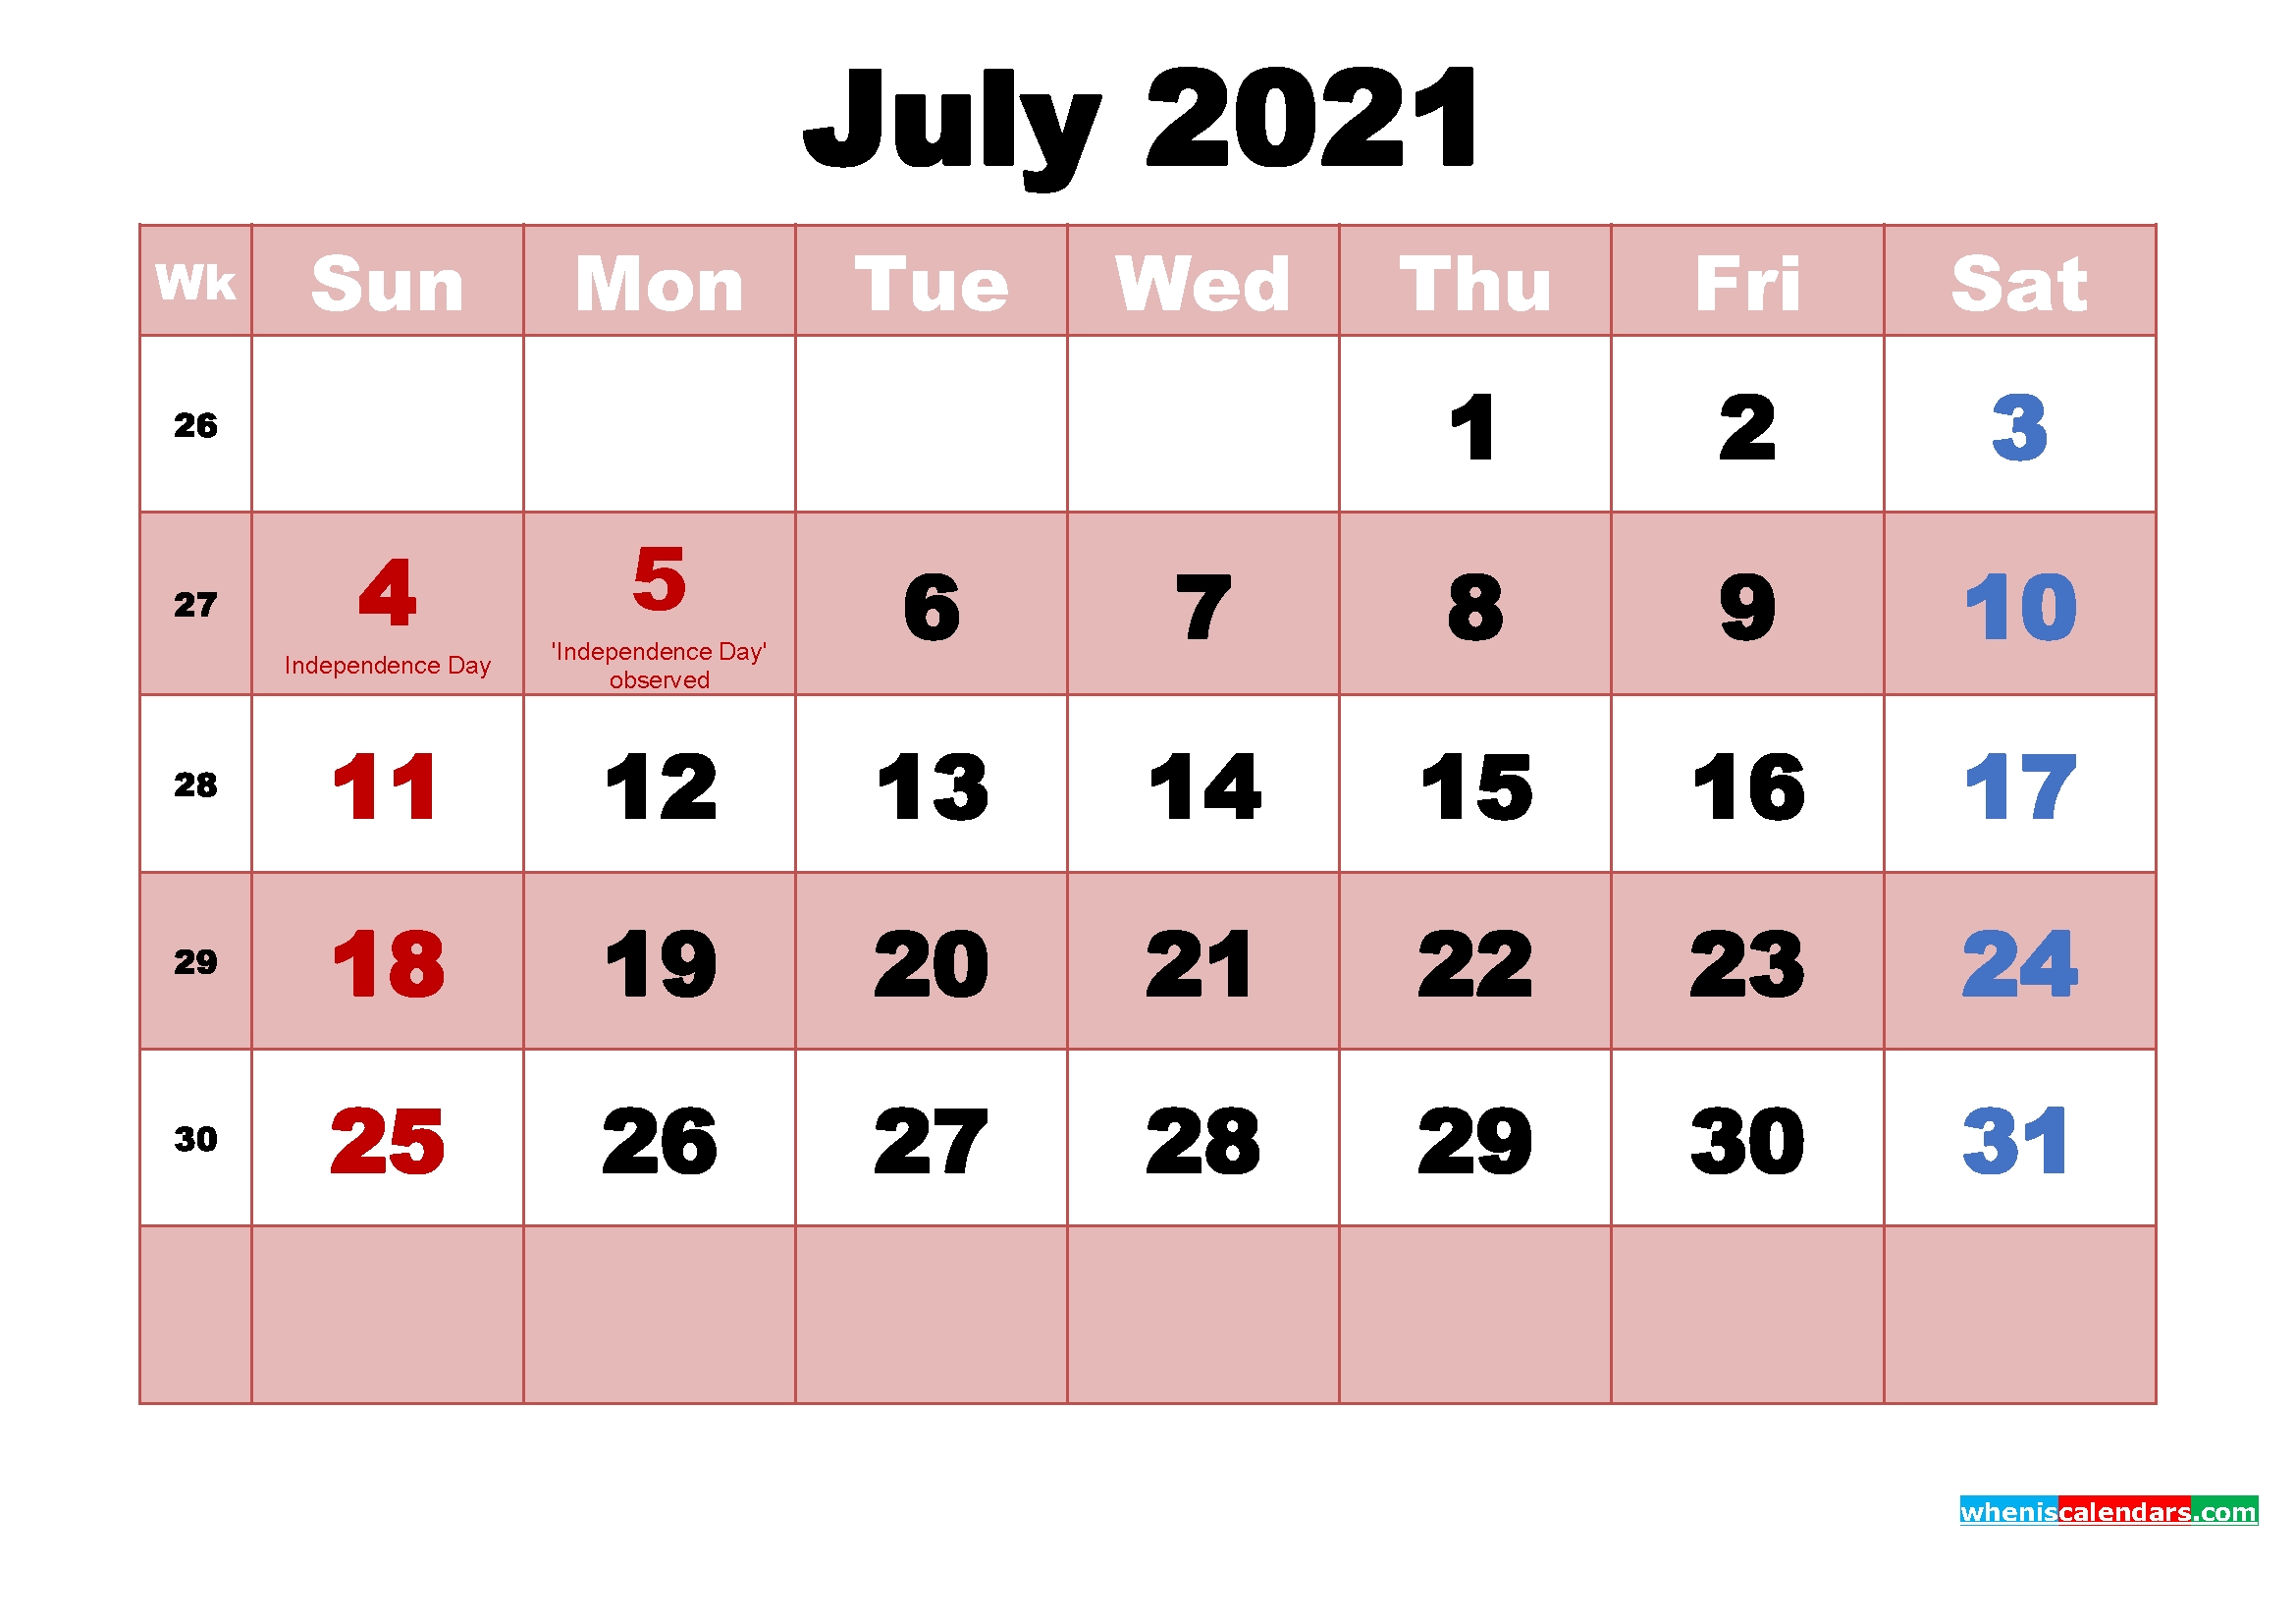 July 2021 Calendar With Holidays Wallpaper